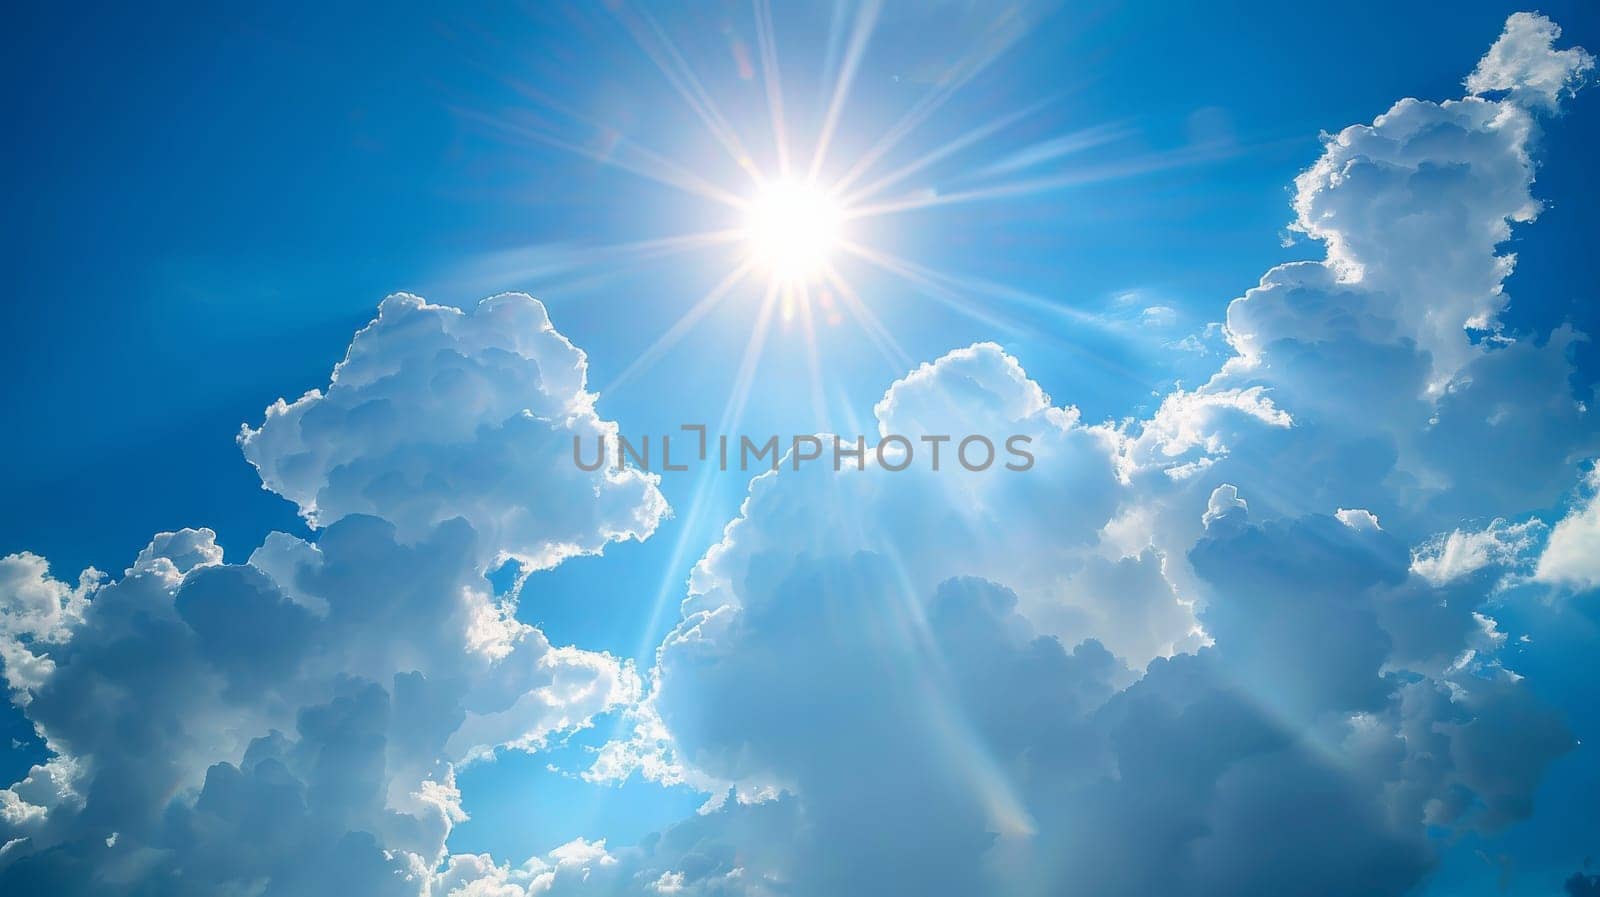 Clouds in the sky with the sun and sunlight sending out beams of light.